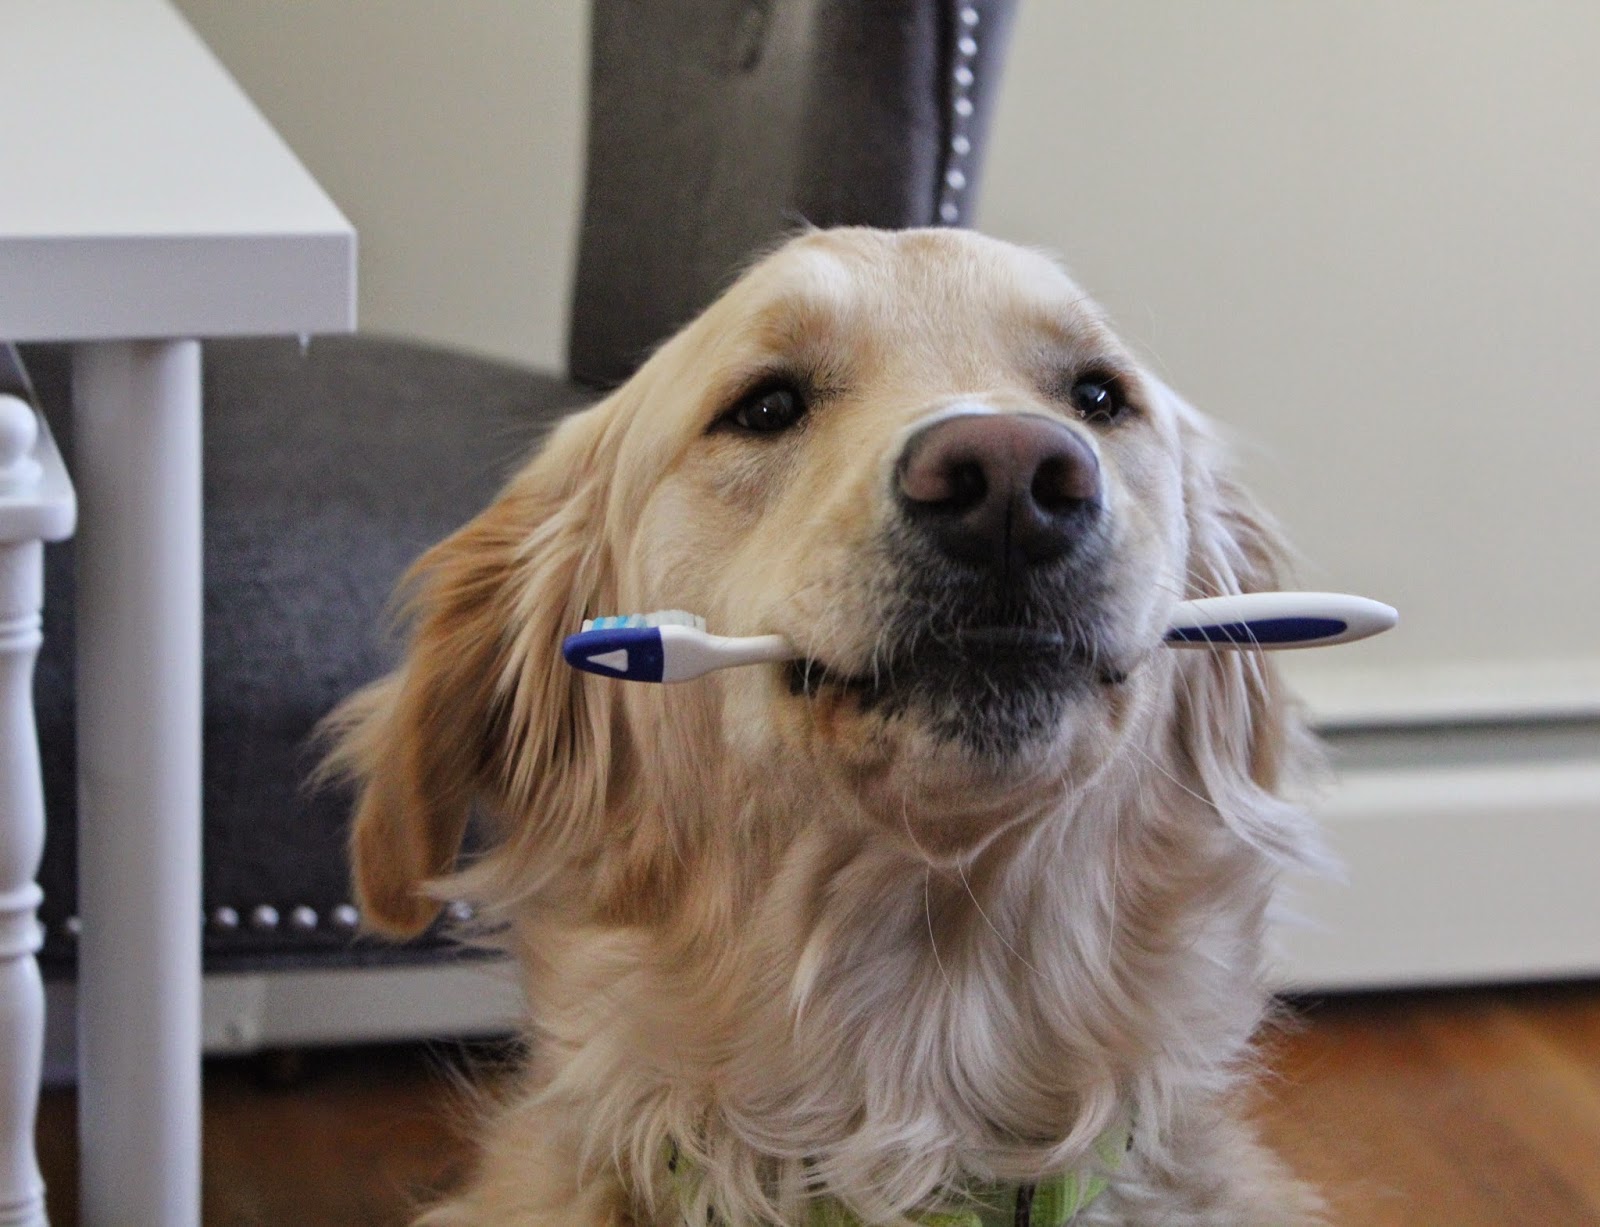 dog holding tooth brush in mouth